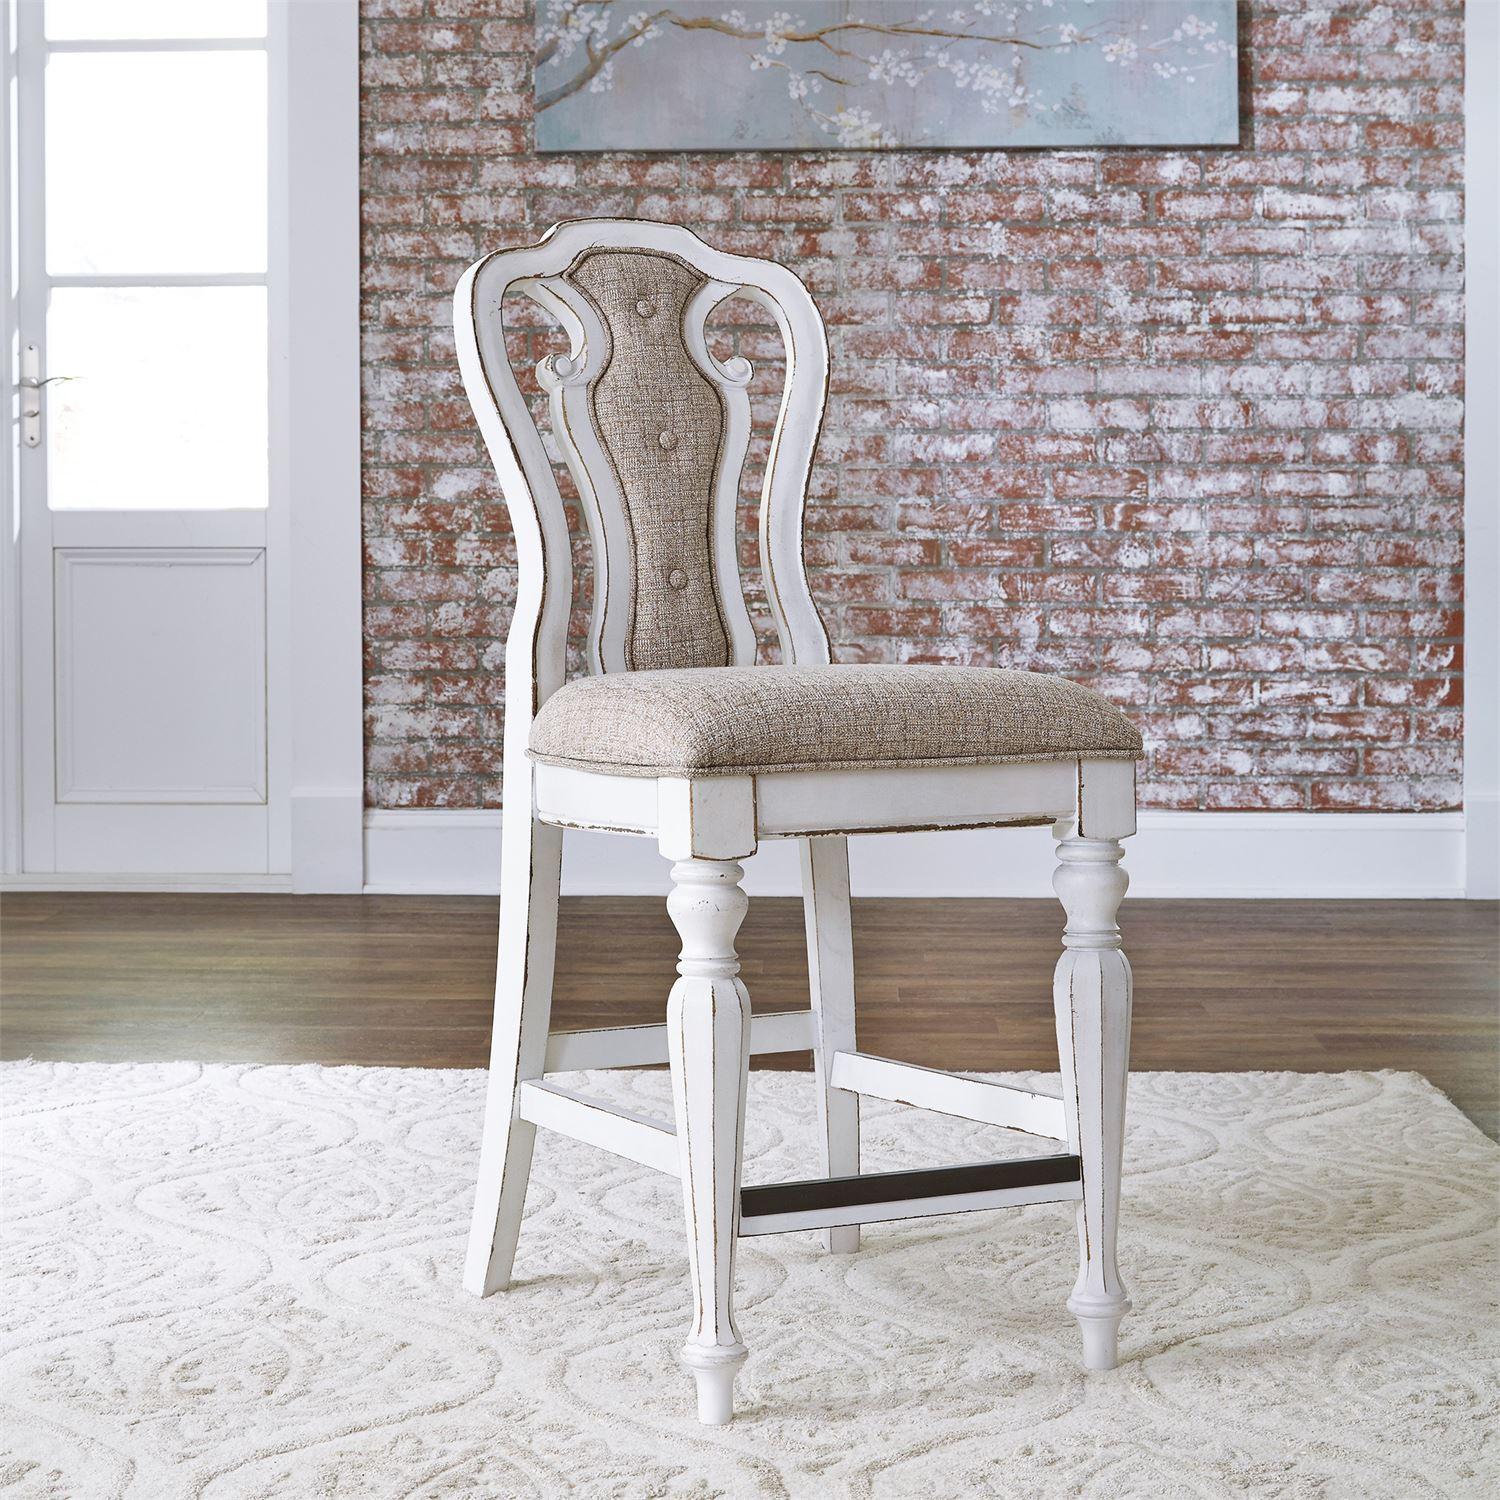 European Traditional Counter Chair Magnolia Manor  (244-DR) Counter Chair 244-B650124 in White 